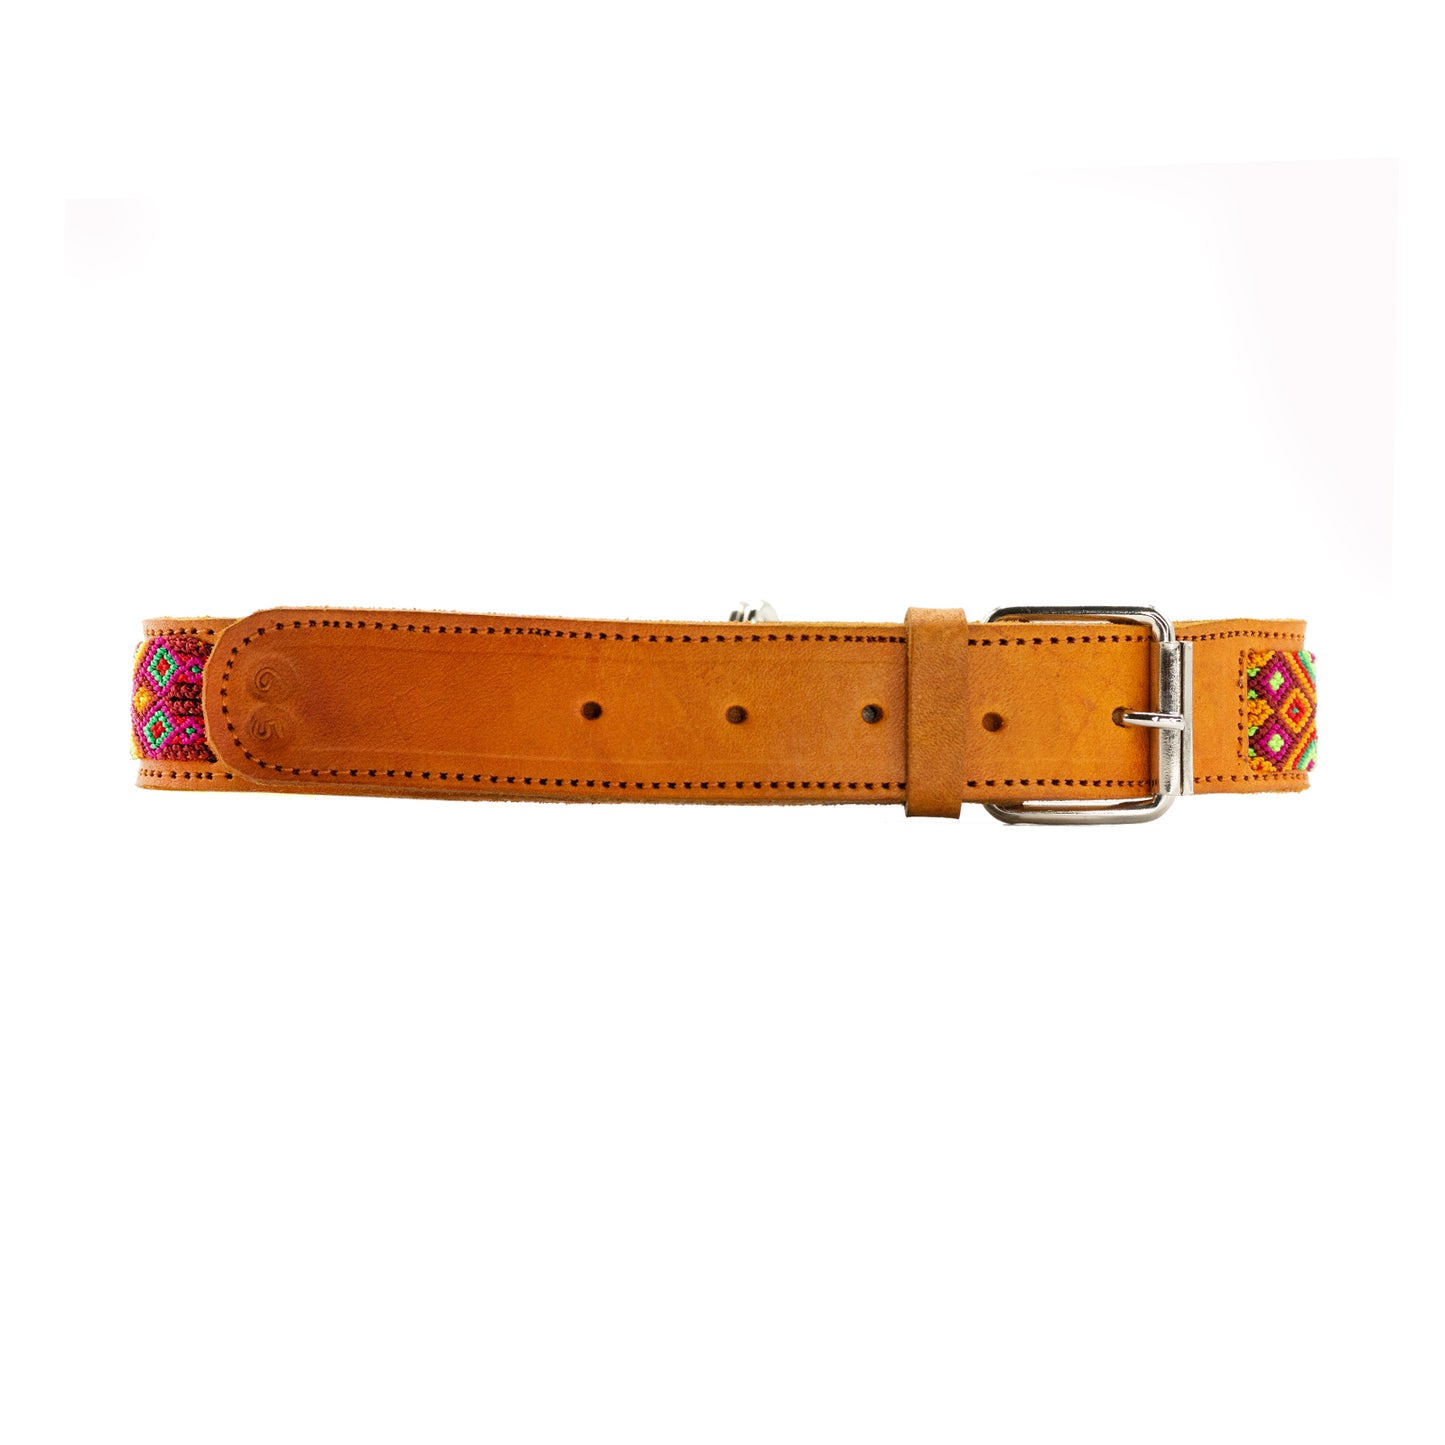 Customized pet collar reflecting the rich cultural heritage of Mexico